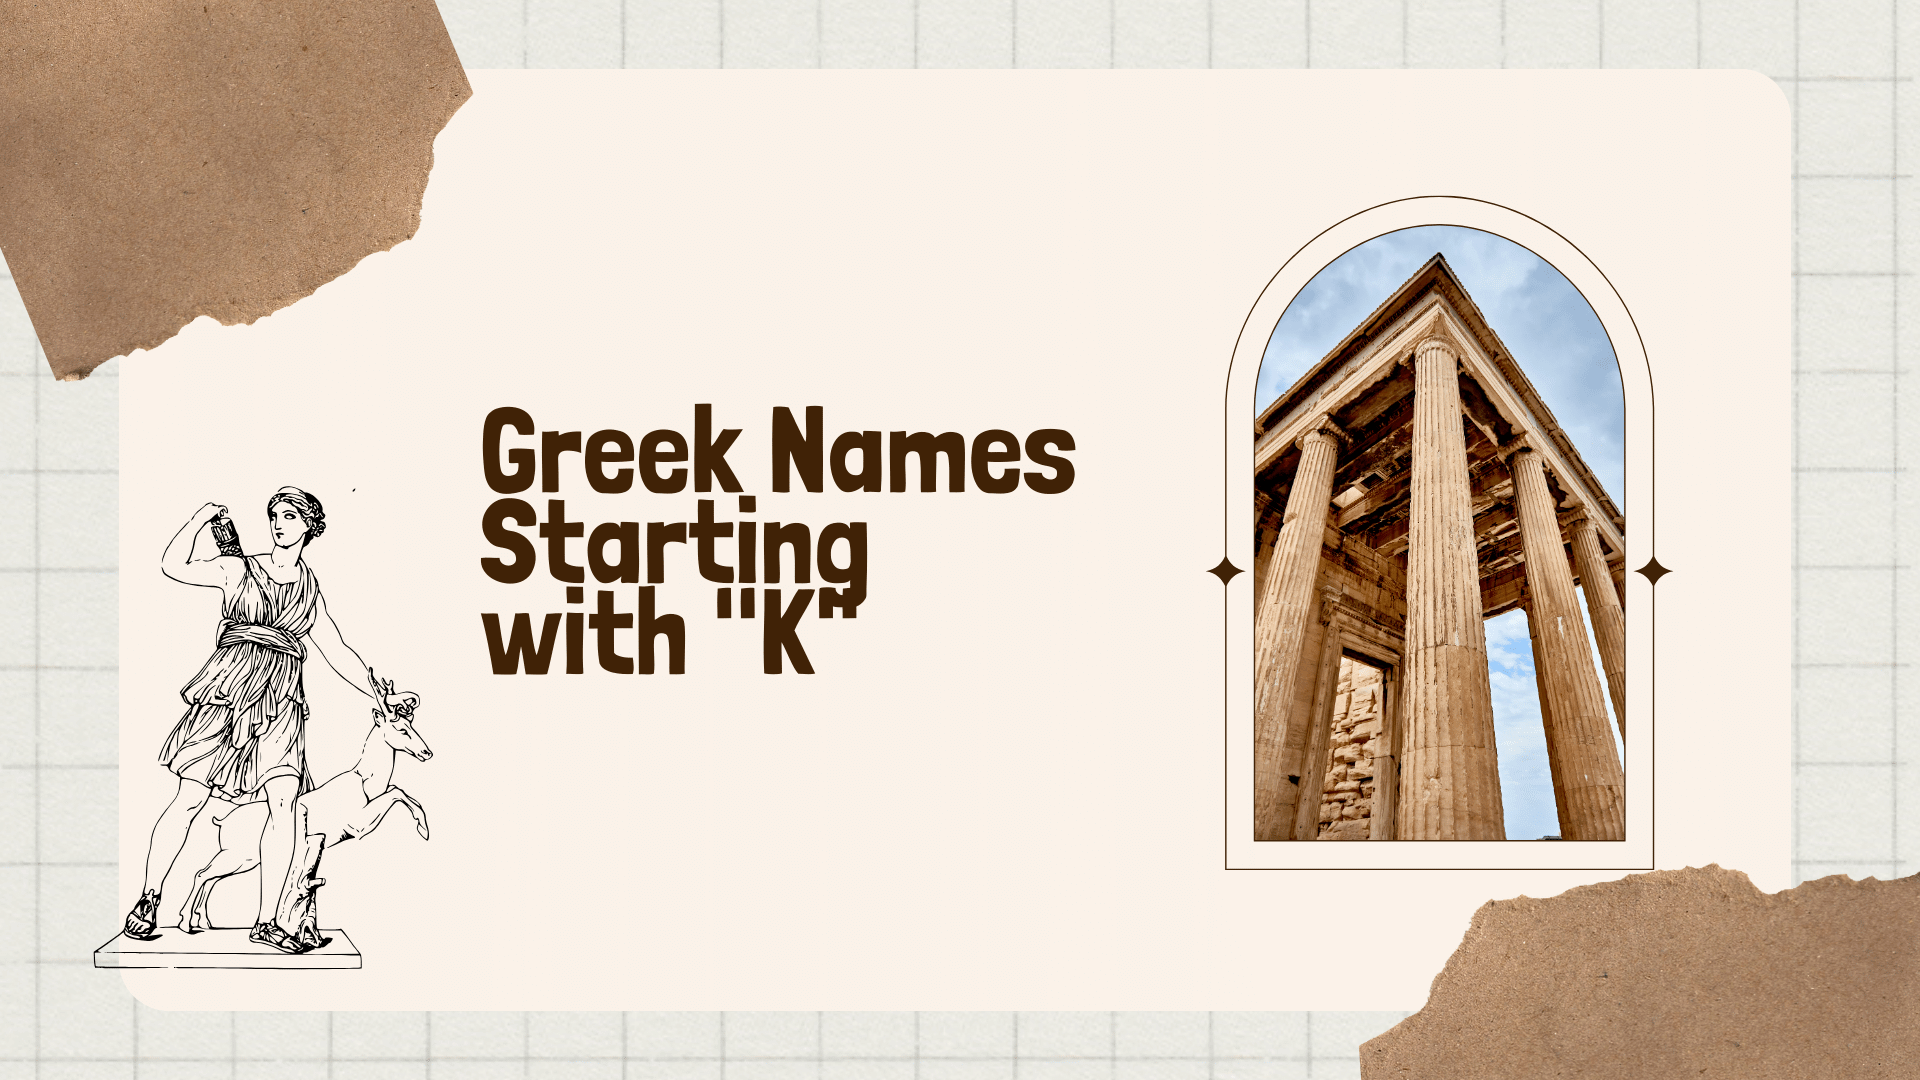 Greek Names Starting With "K"